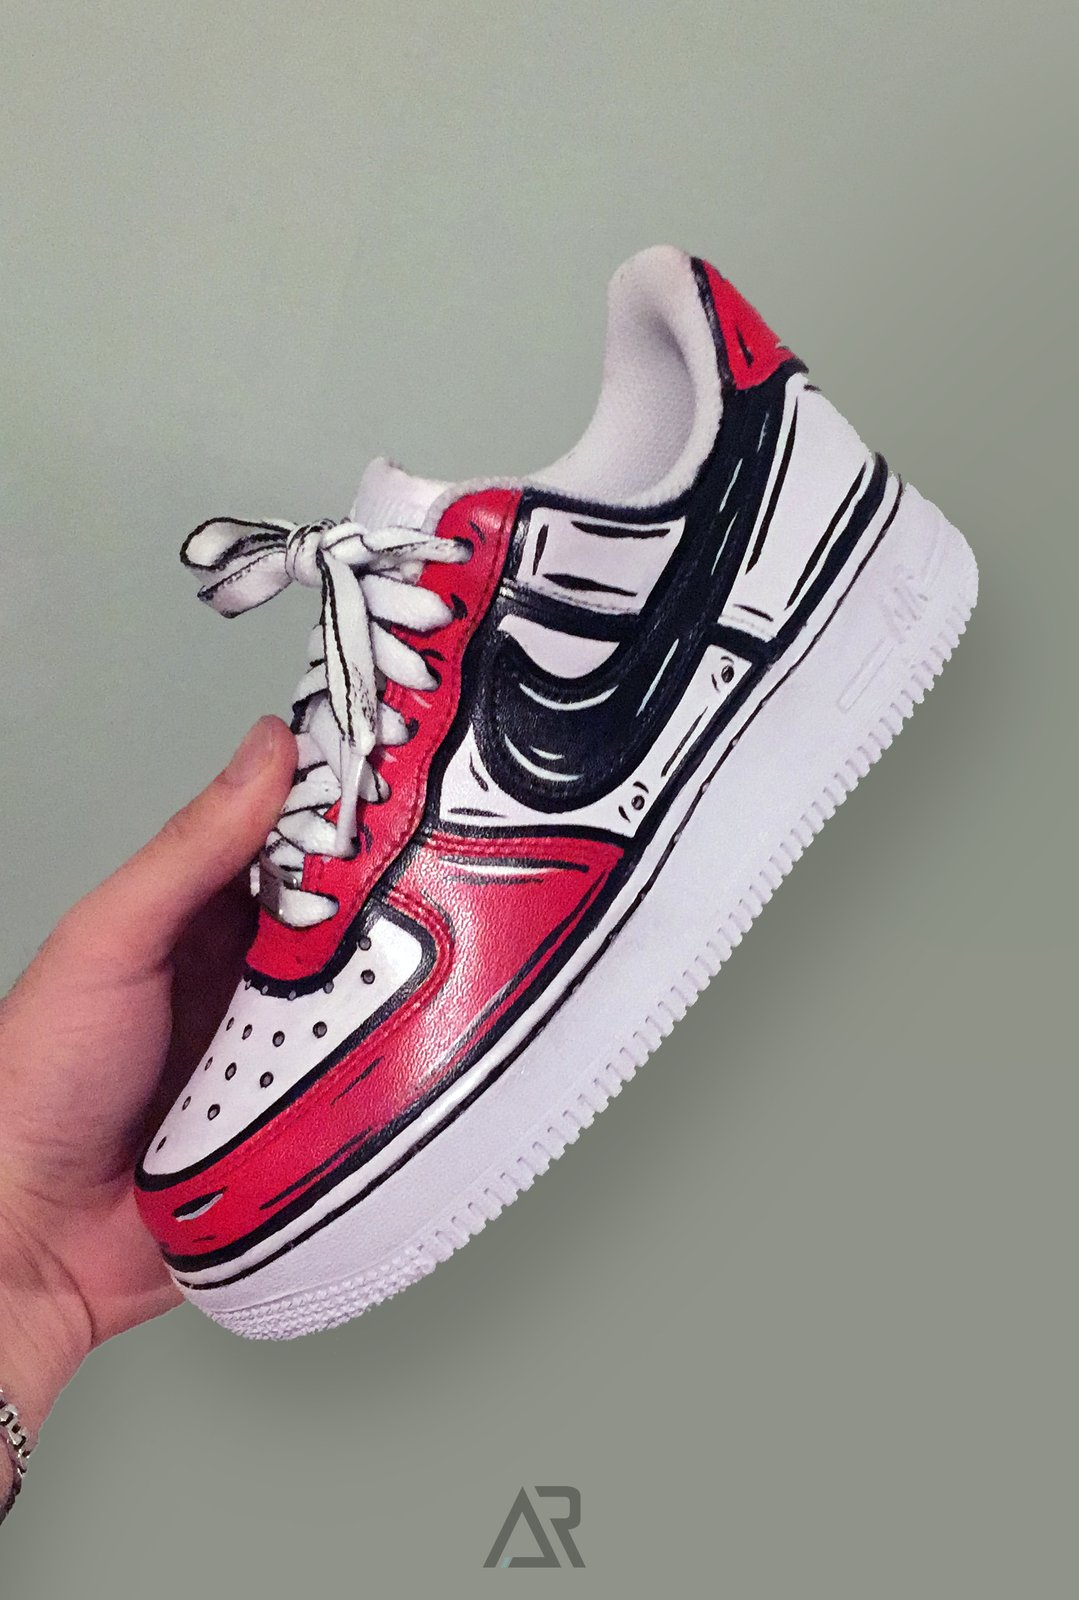 How To Draw Nike How To Draw Air Force Ones Step by Step Drawing Guide  by Dawn  DragoArt